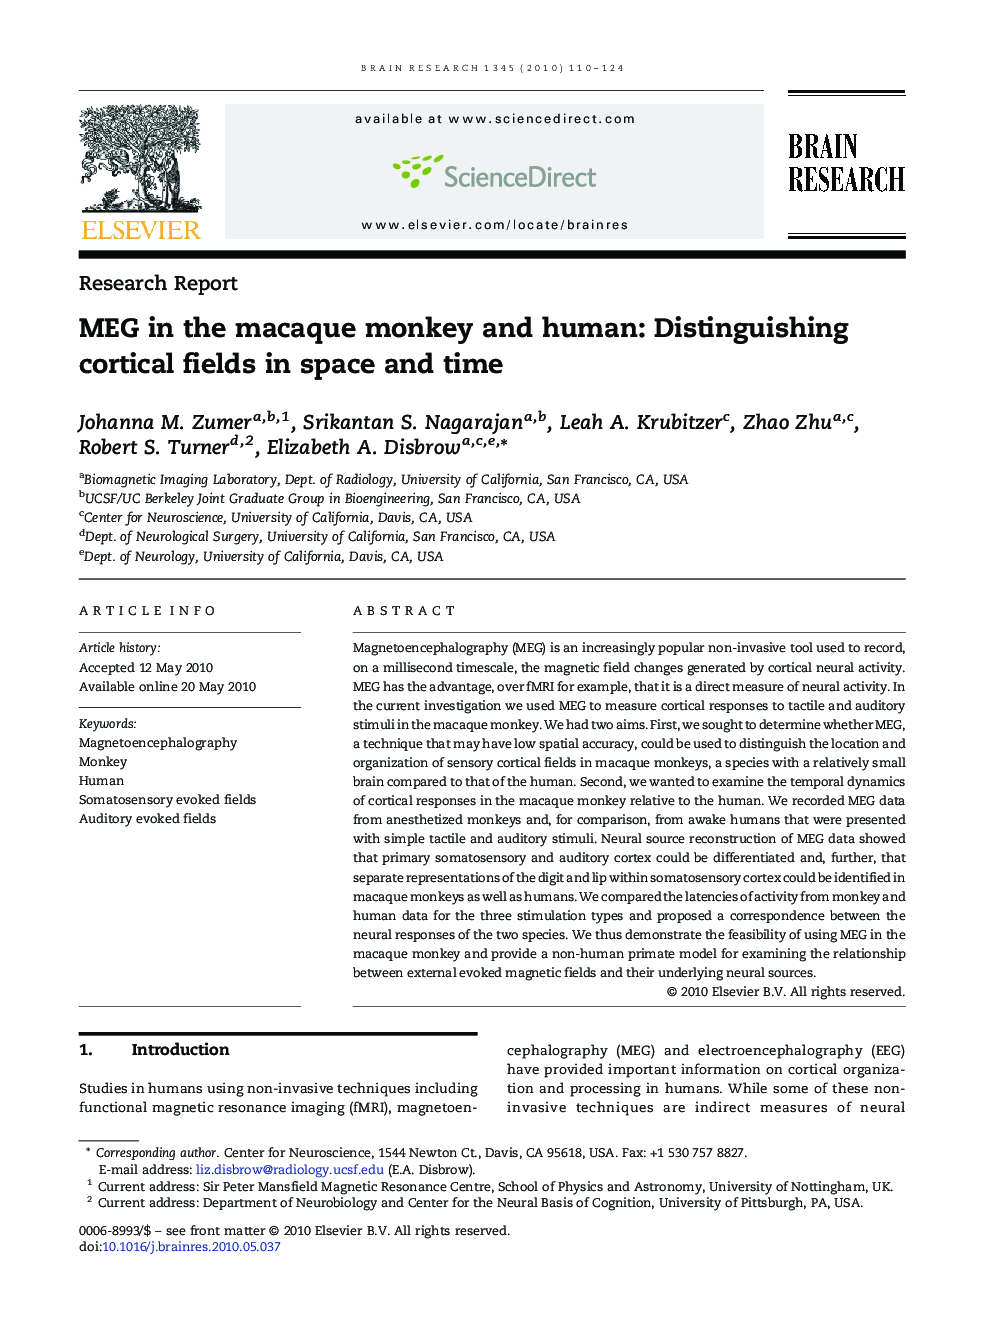 MEG in the macaque monkey and human: Distinguishing cortical fields in space and time